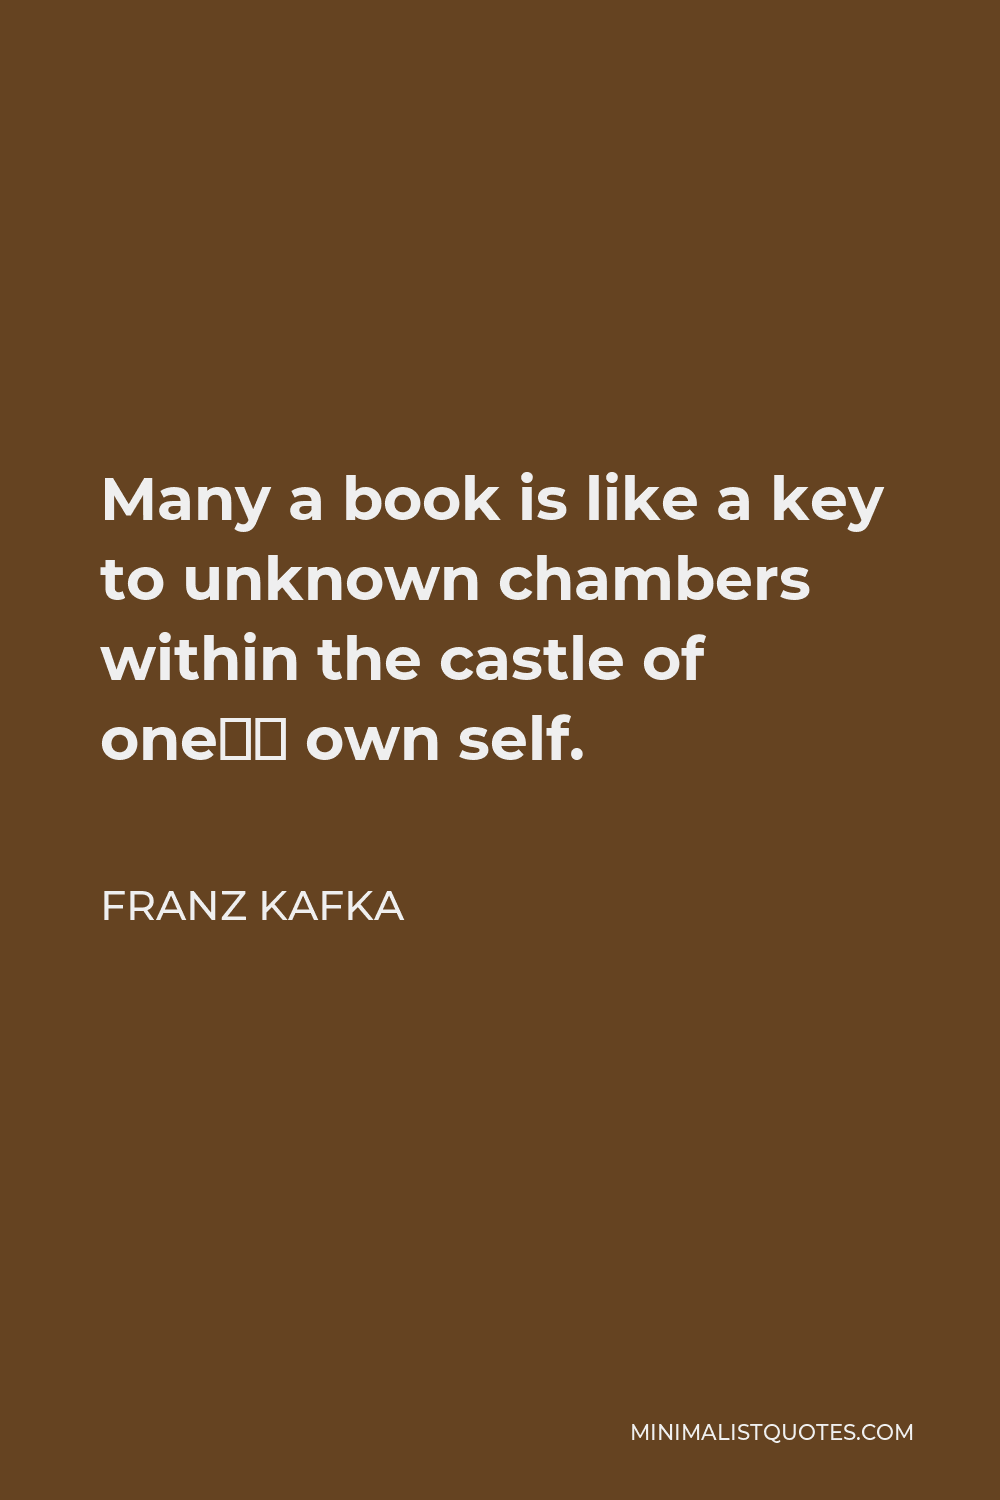 Franz Kafka Quote - Many a book is like a key to unknown chambers within the castle of one’s own self.